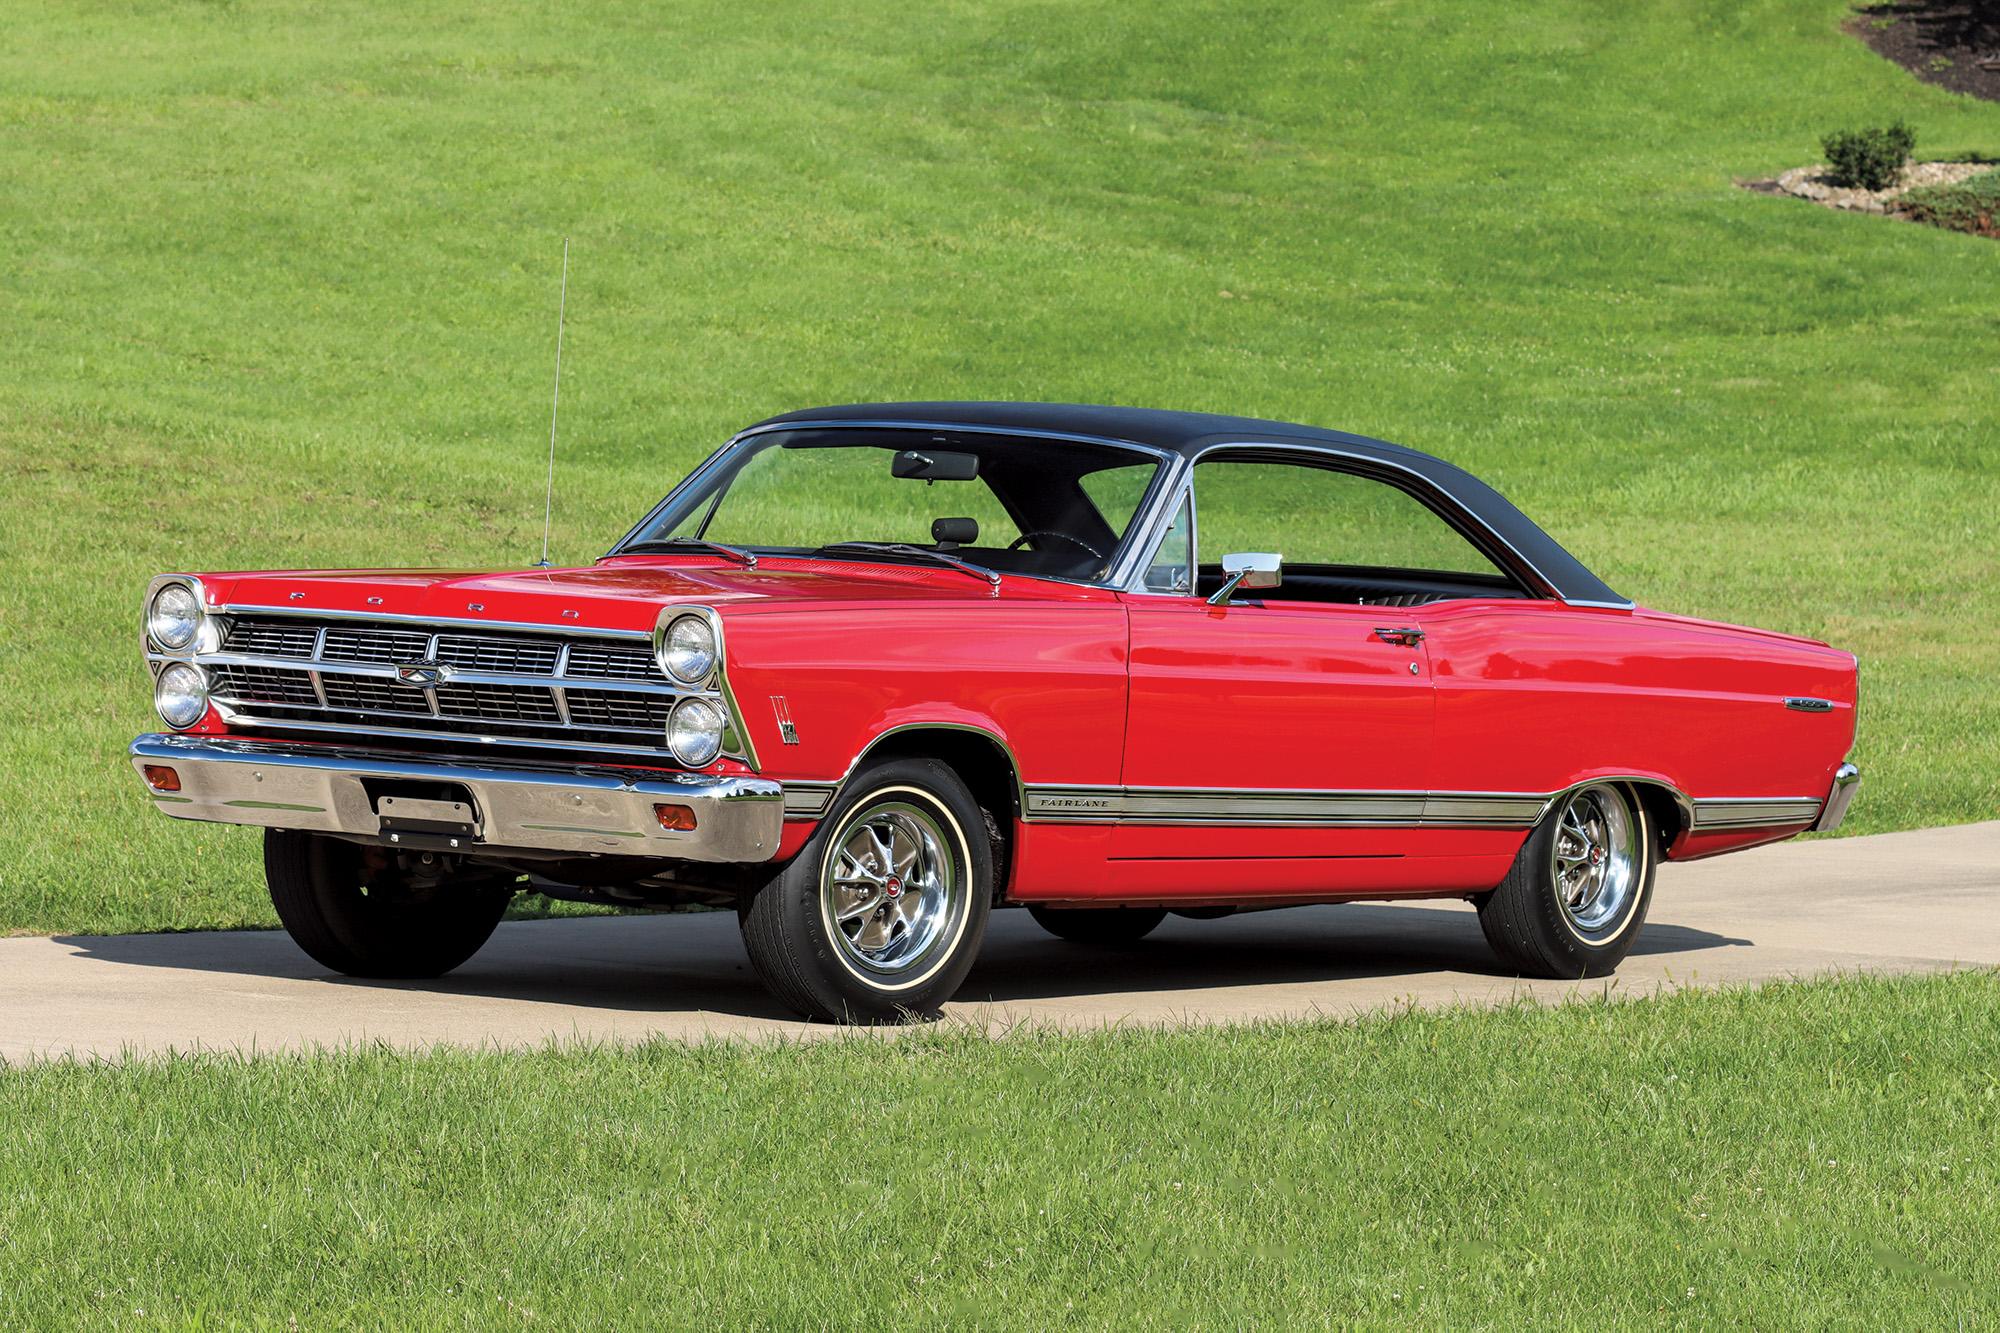 R Code 425-hp, 427-Powered 1967 Ford Fairlane 500 with Only 10,000-miles